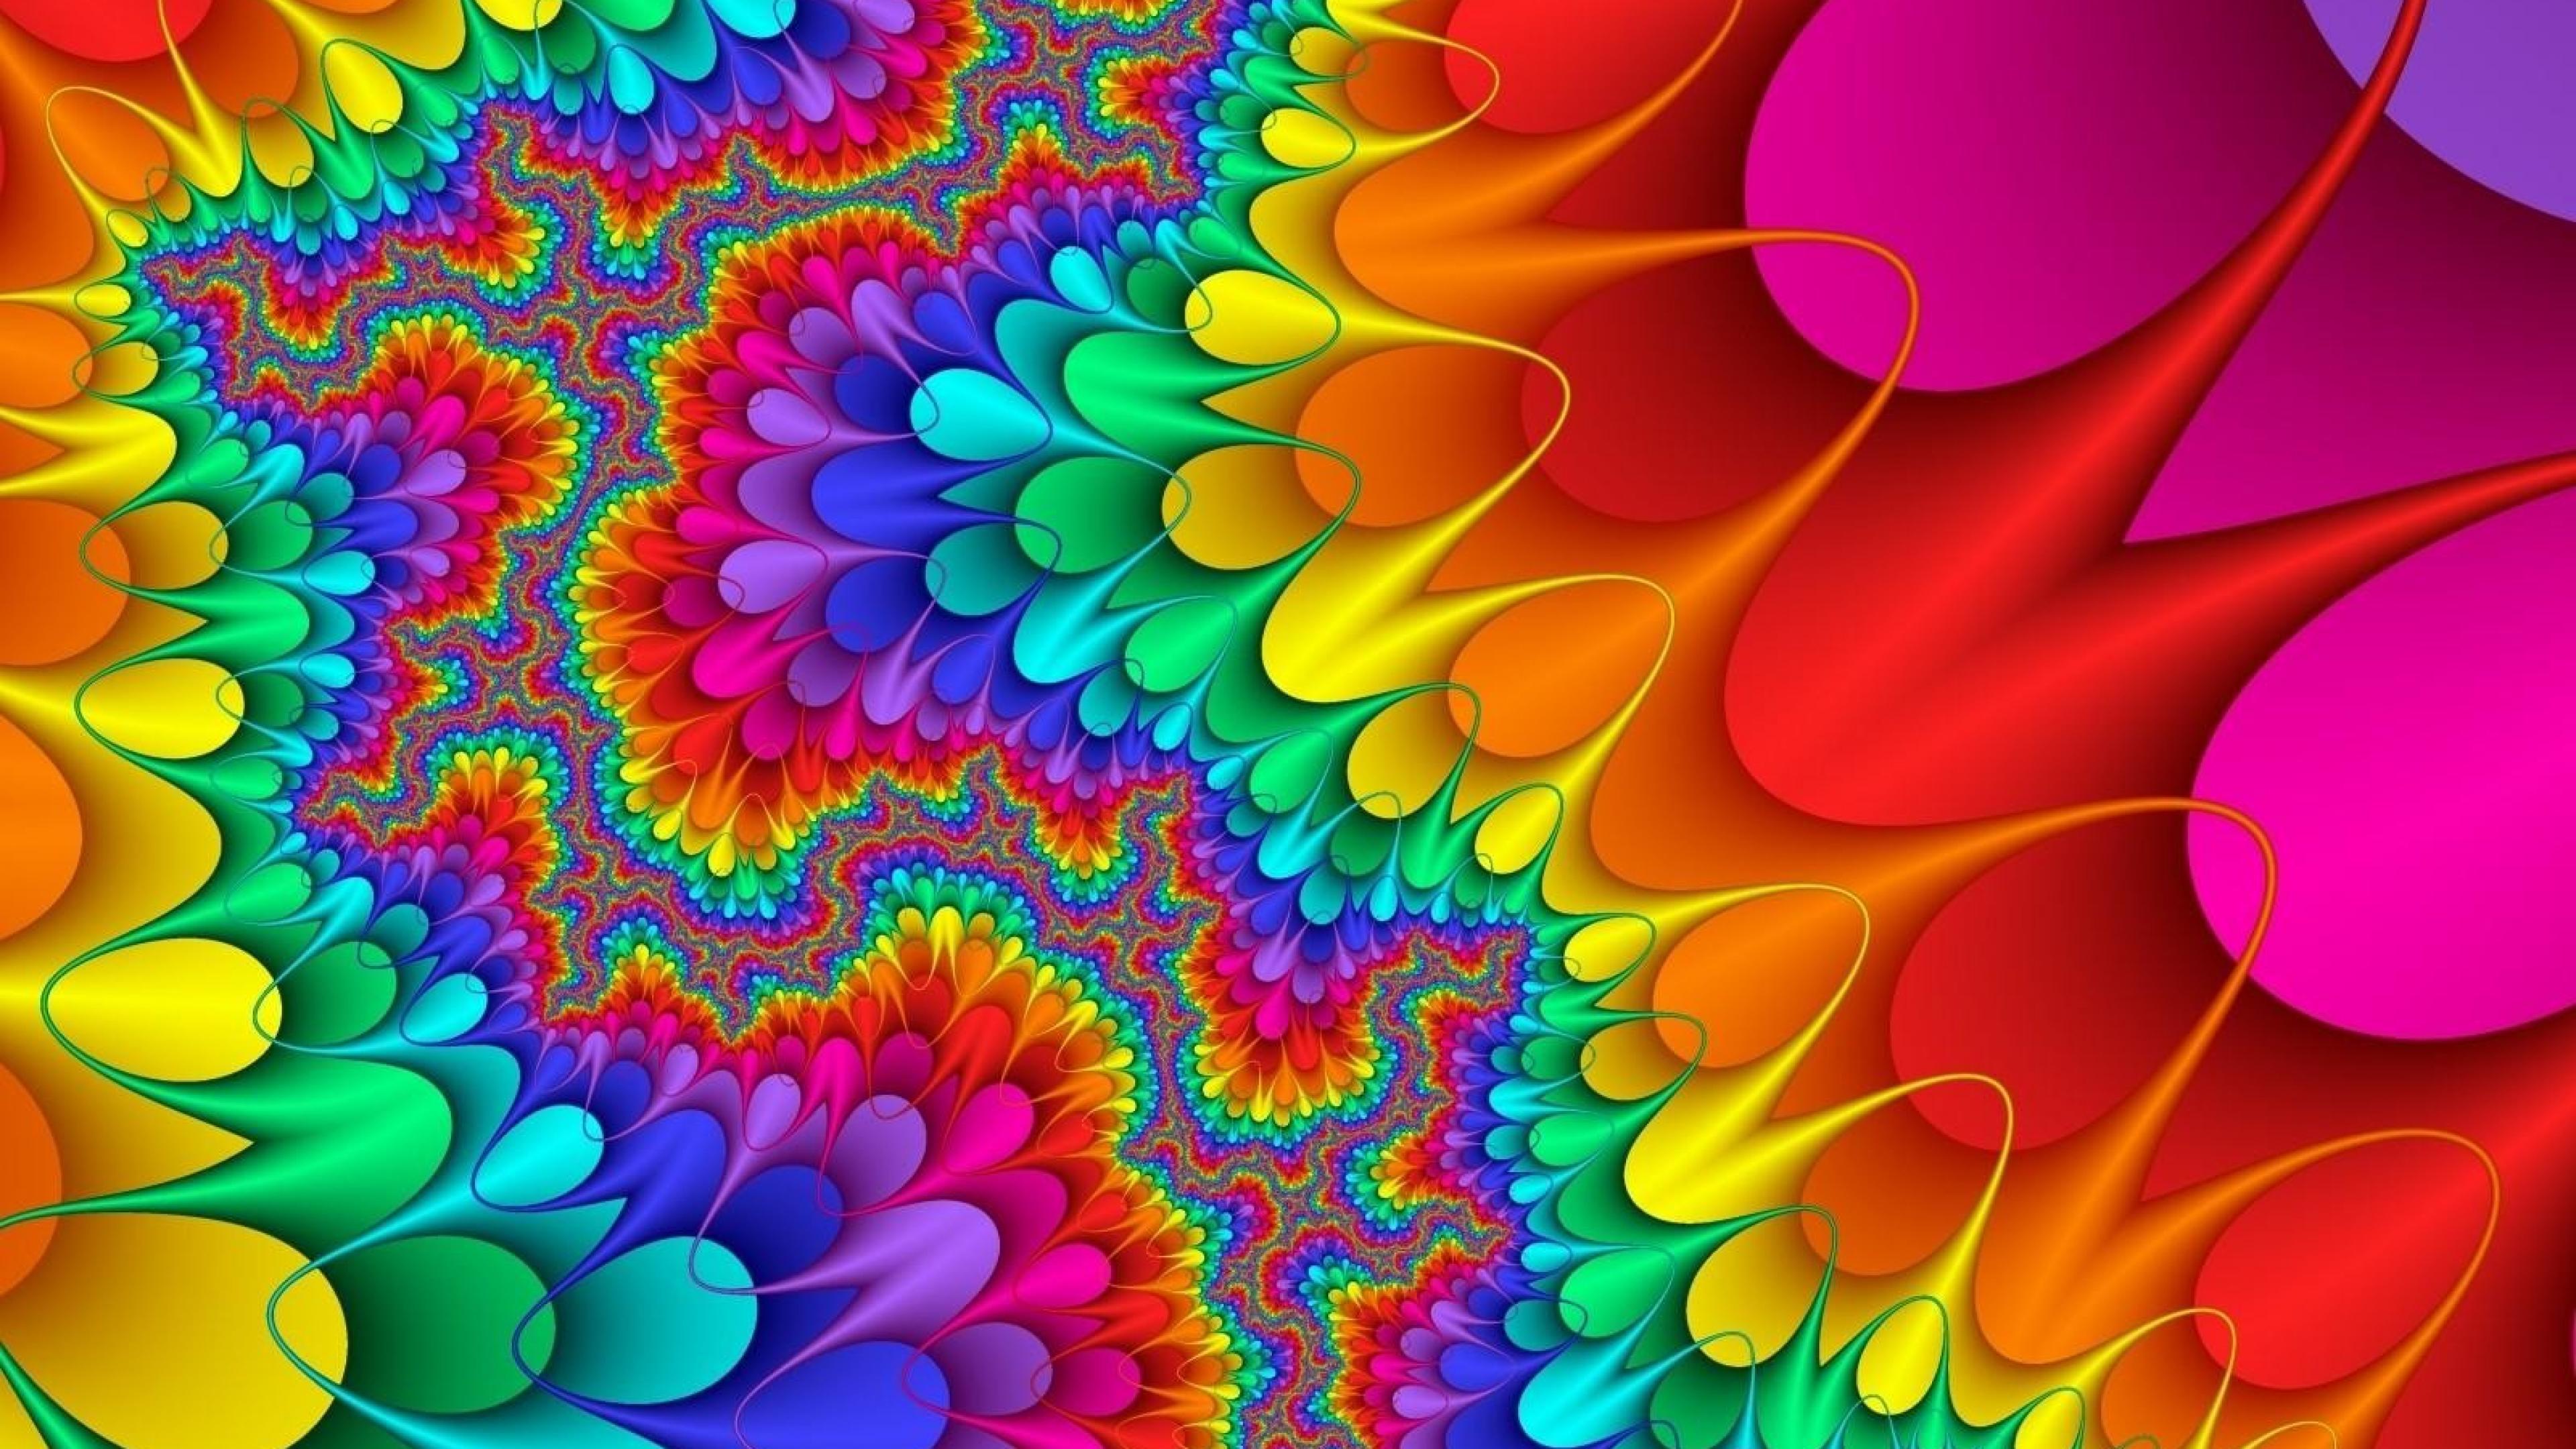 3D & Abstract Colorful Fractals 4K wallpapers